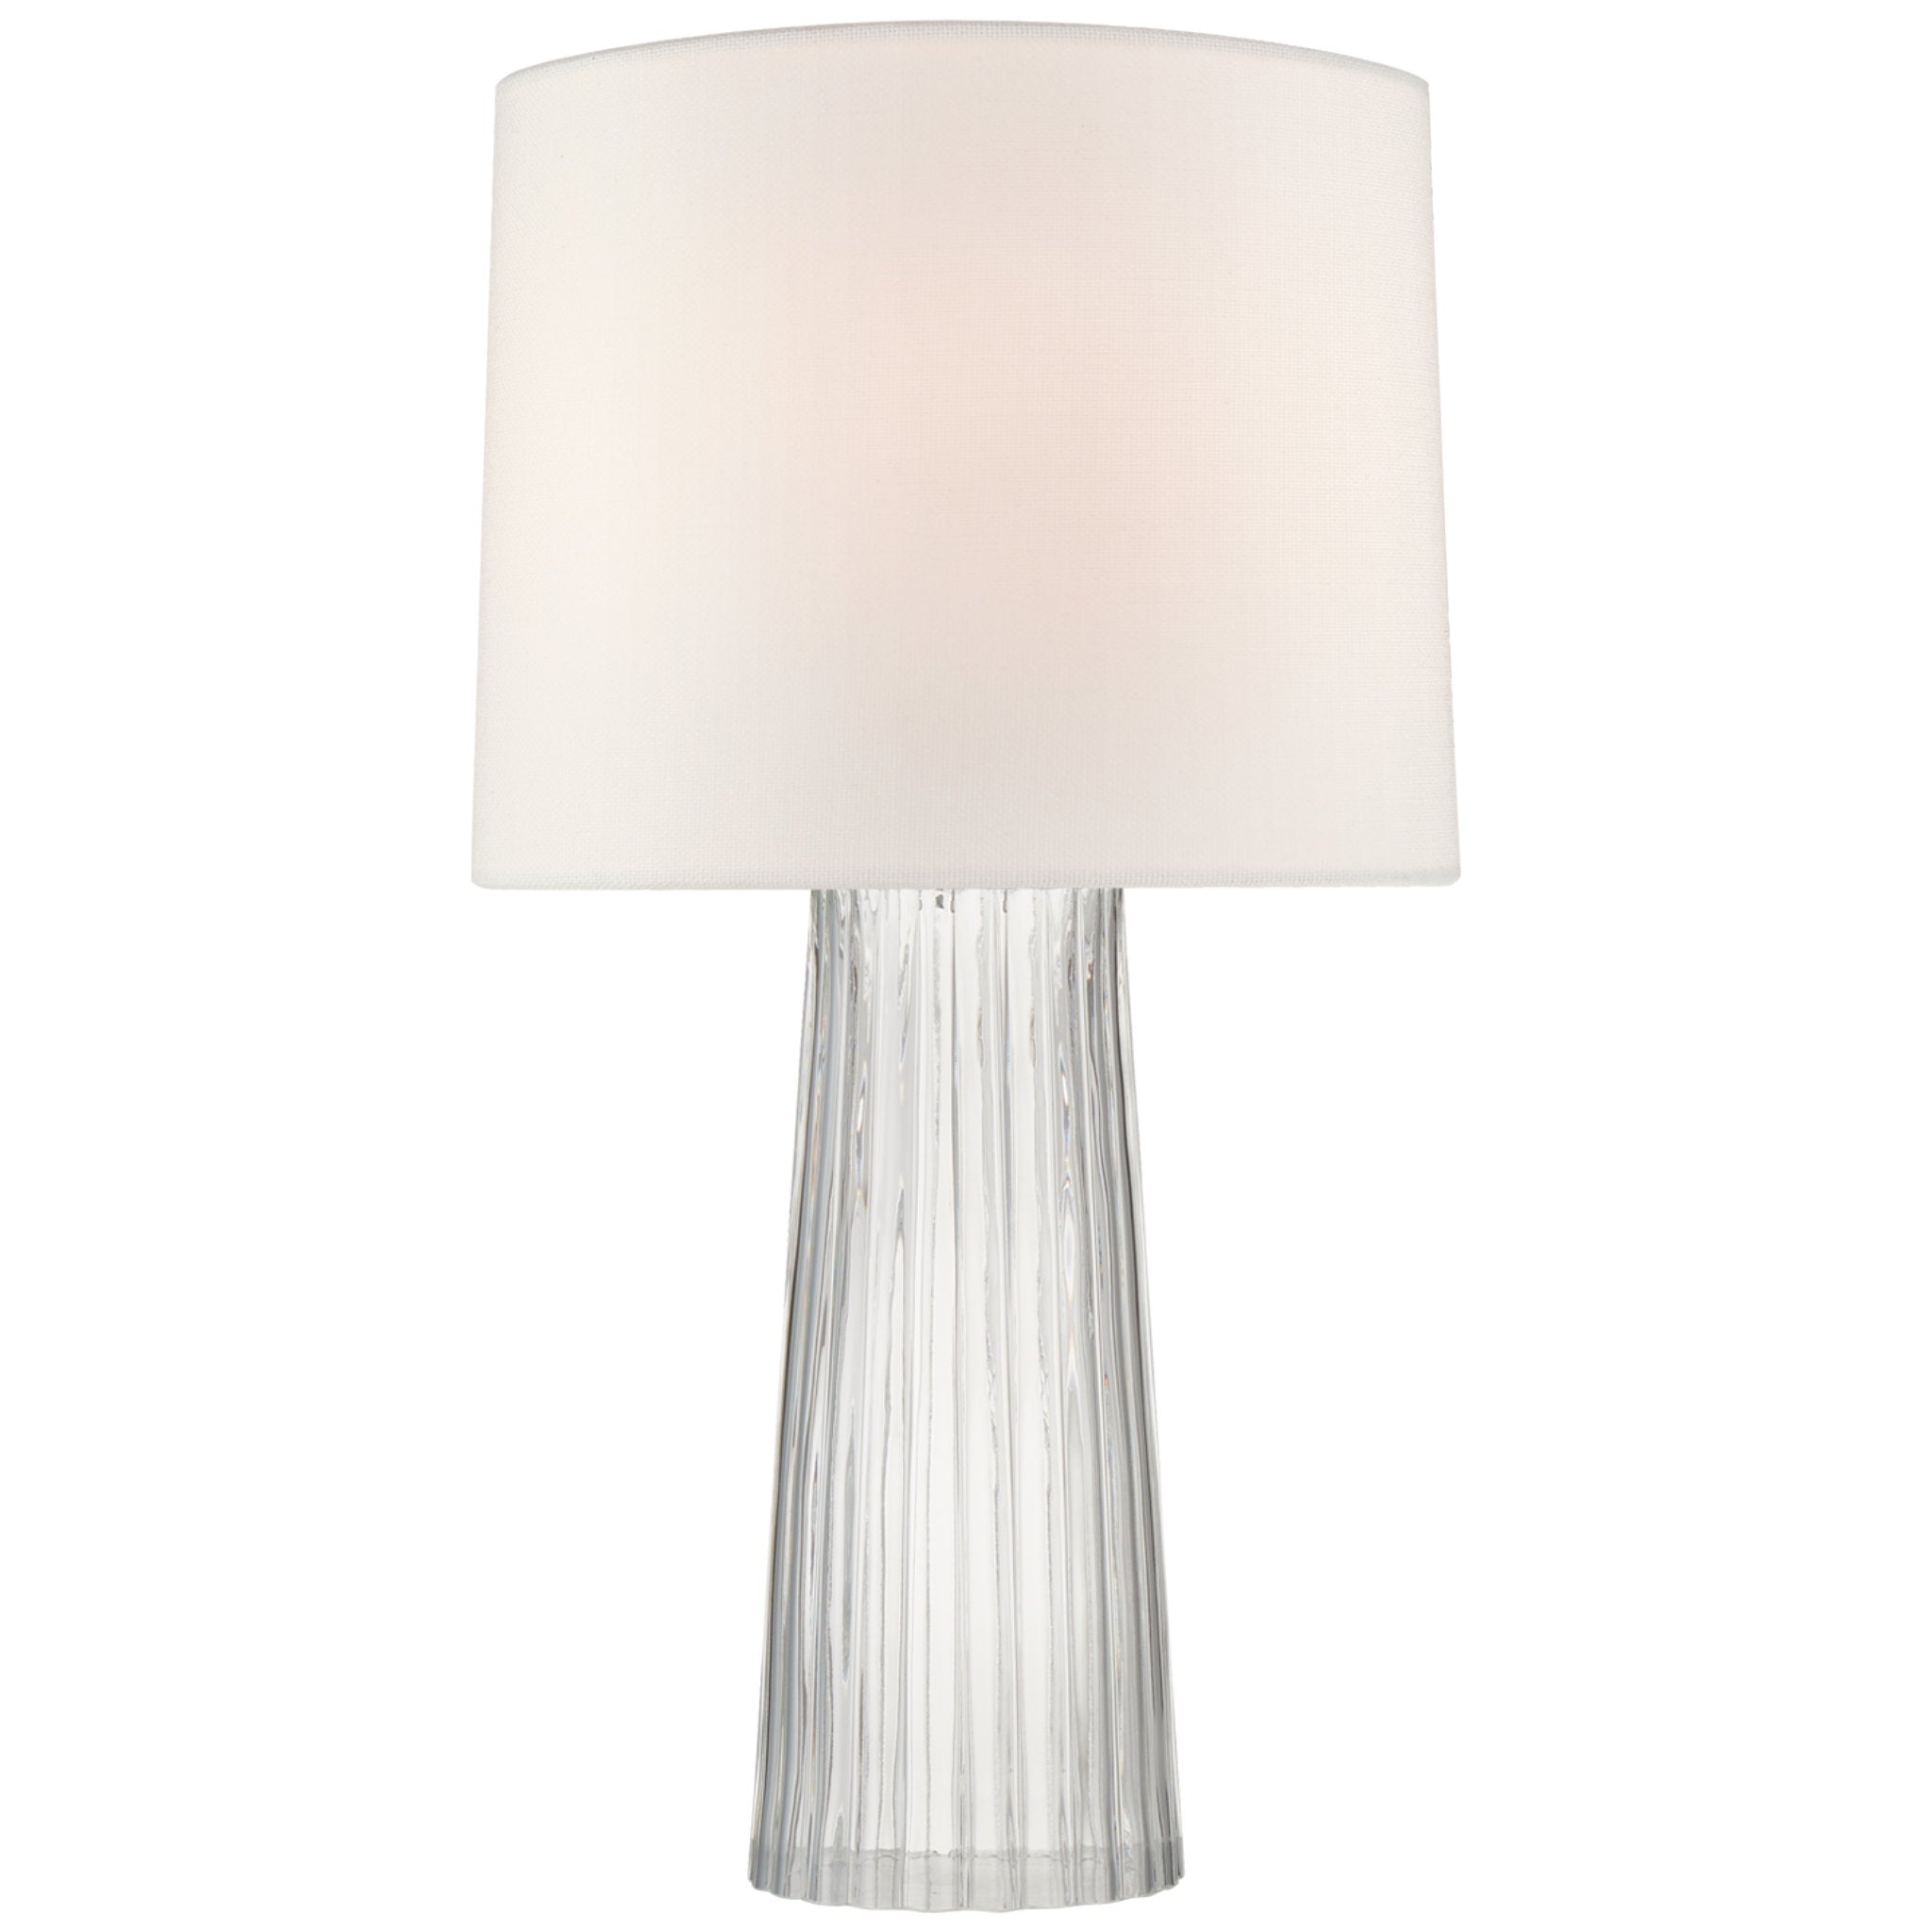 Barbara Barry Danube Medium Table Lamp in Clear Glass with Linen Shade